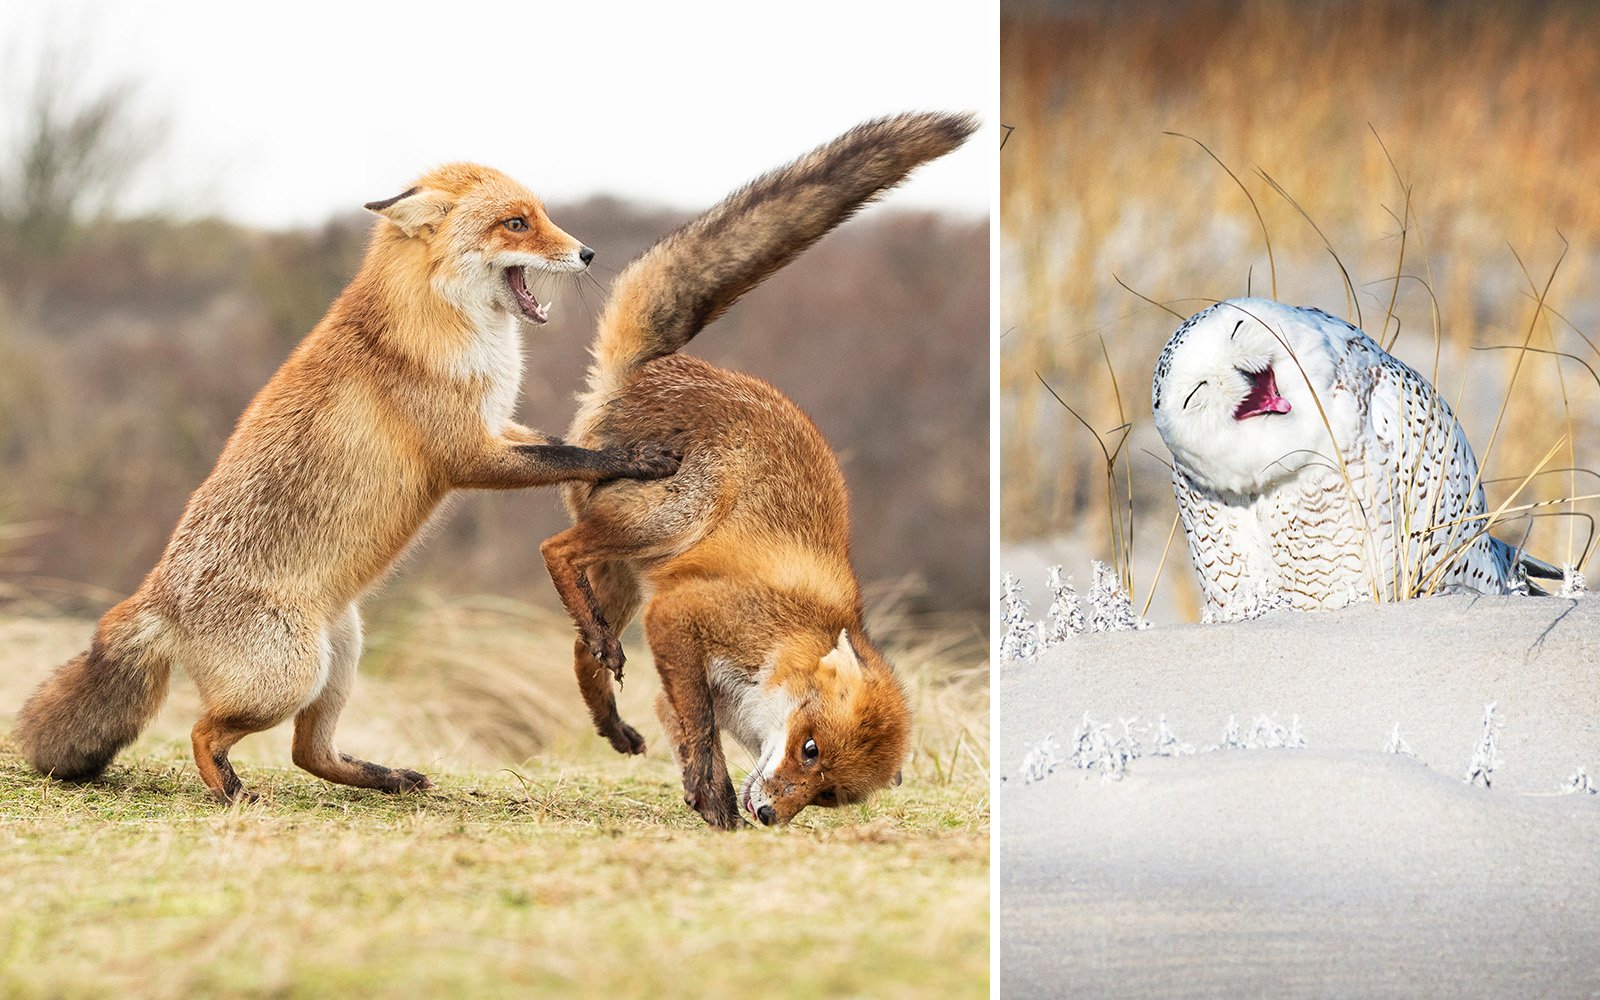  comedy wildlife photography awards finalists prove nature 